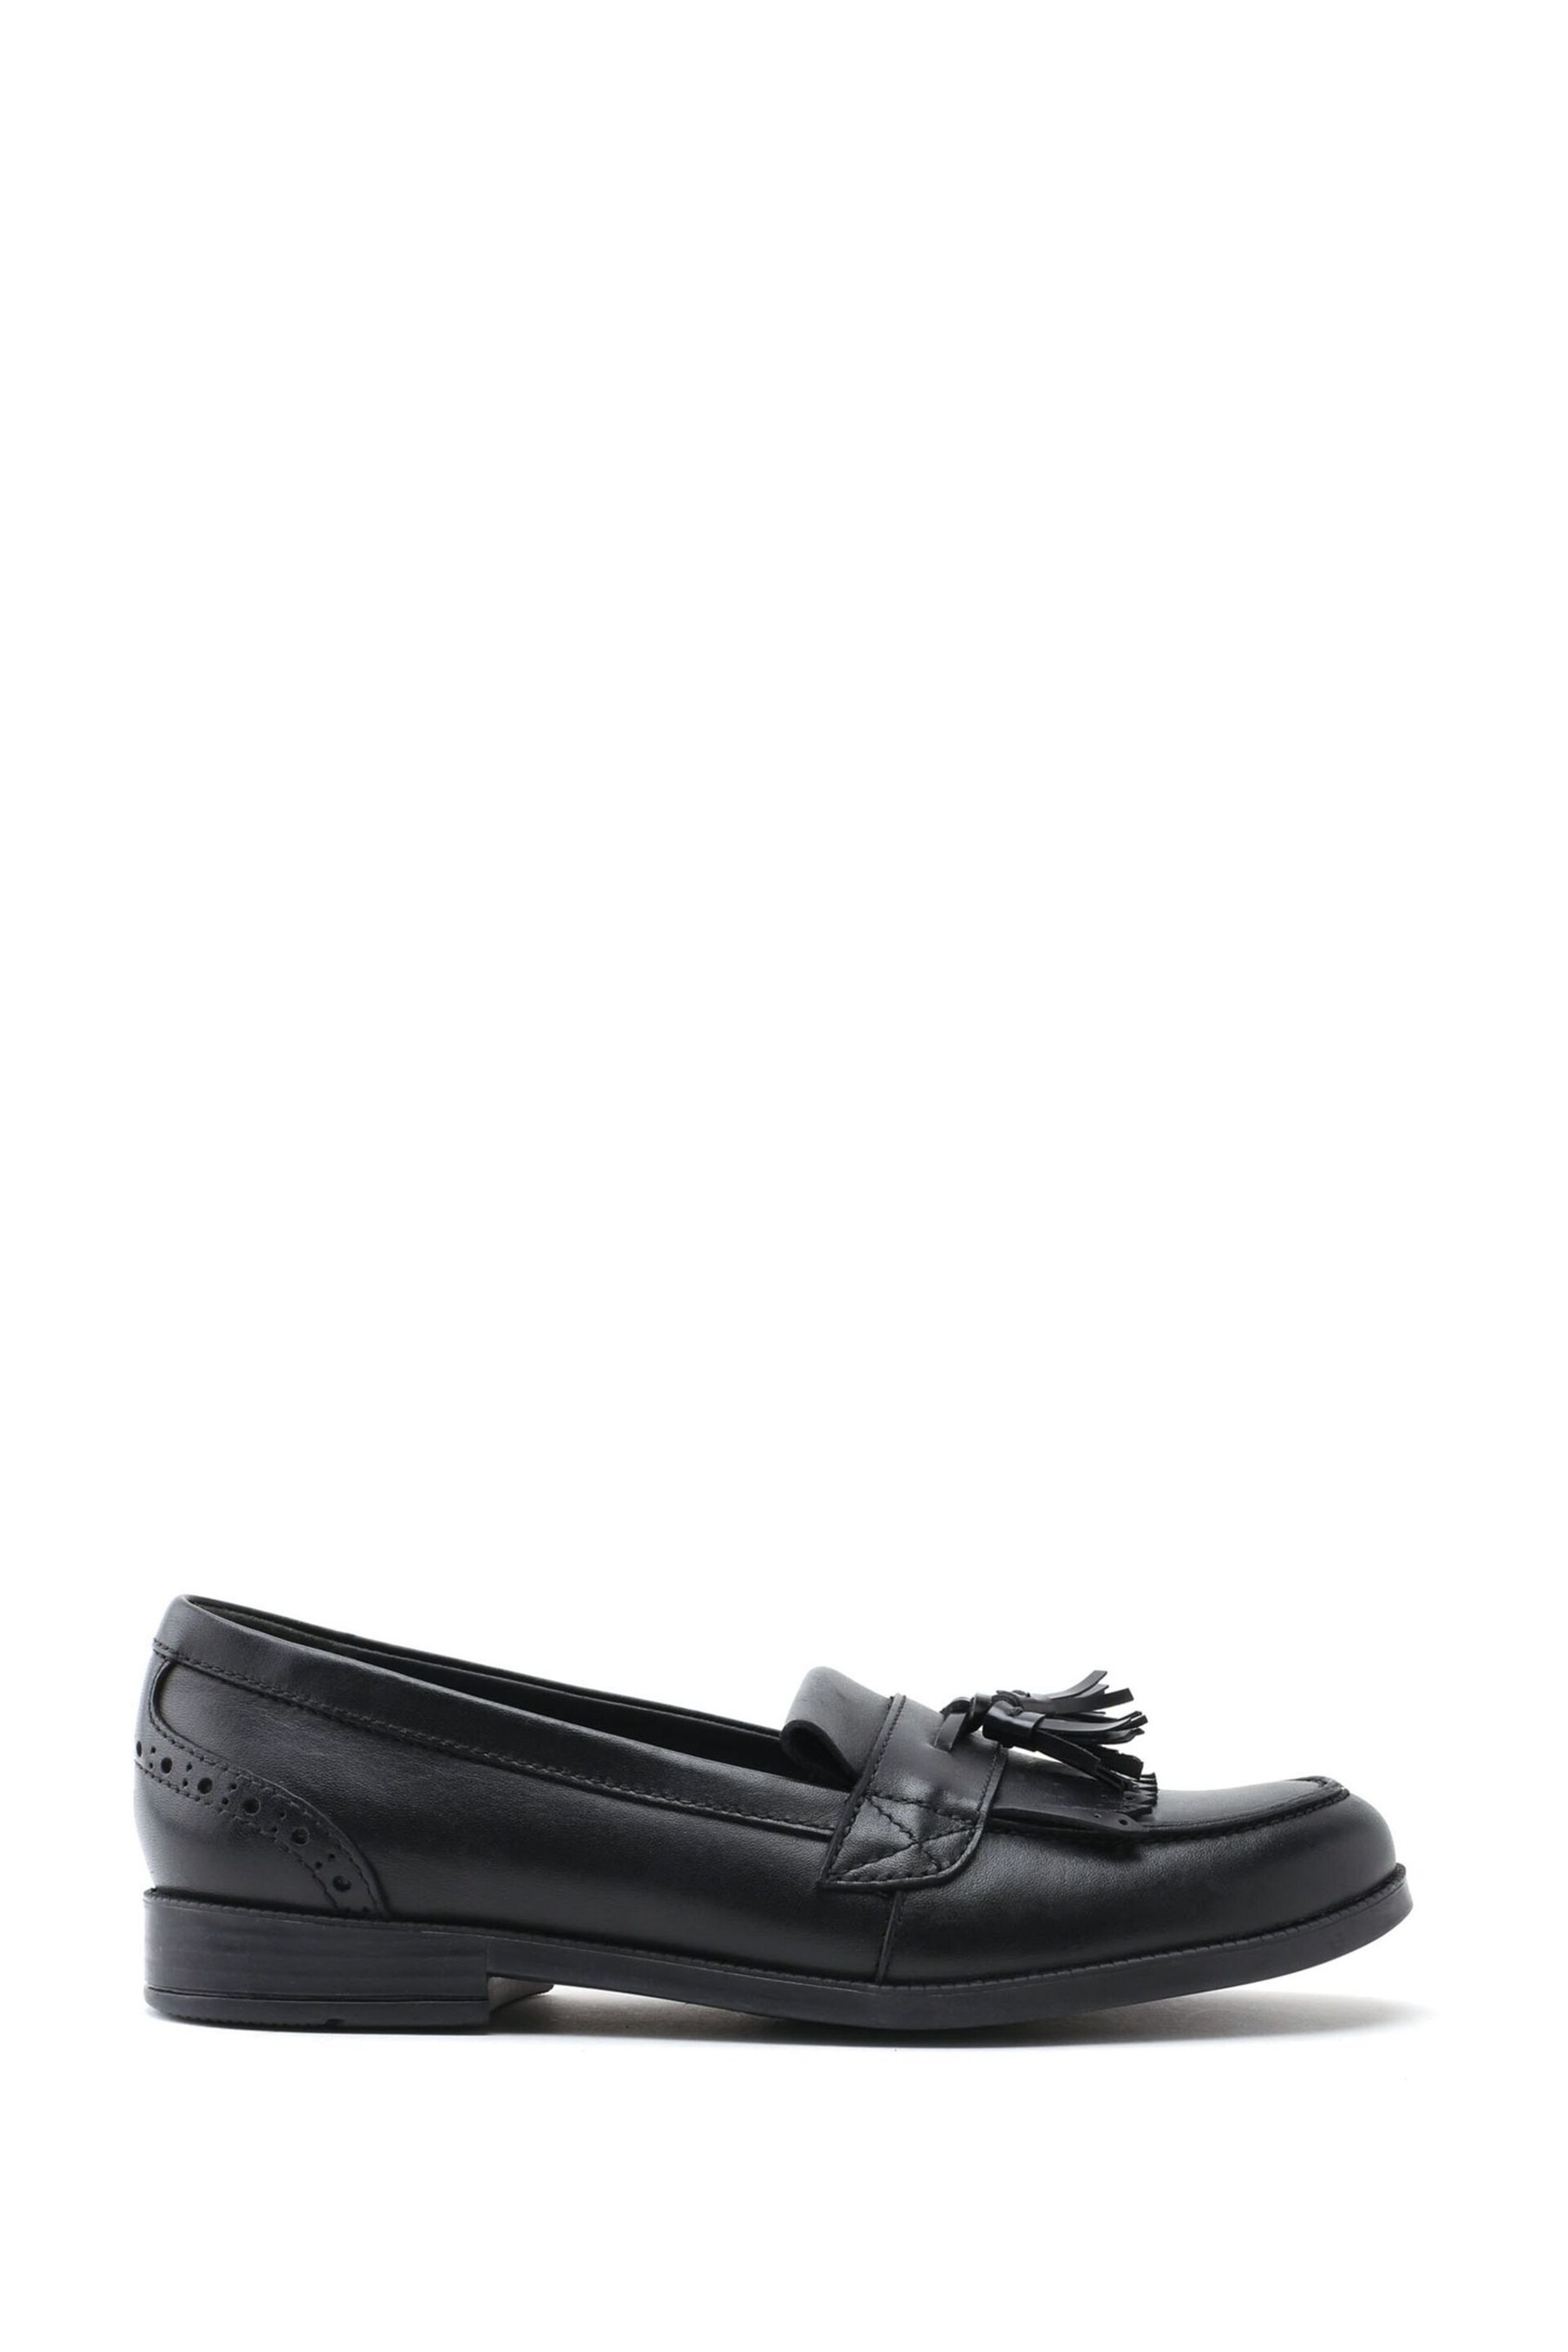 Start-Rite Sketch Slip On Black Patent Leather School Shoes Wide Fit - Image 1 of 5